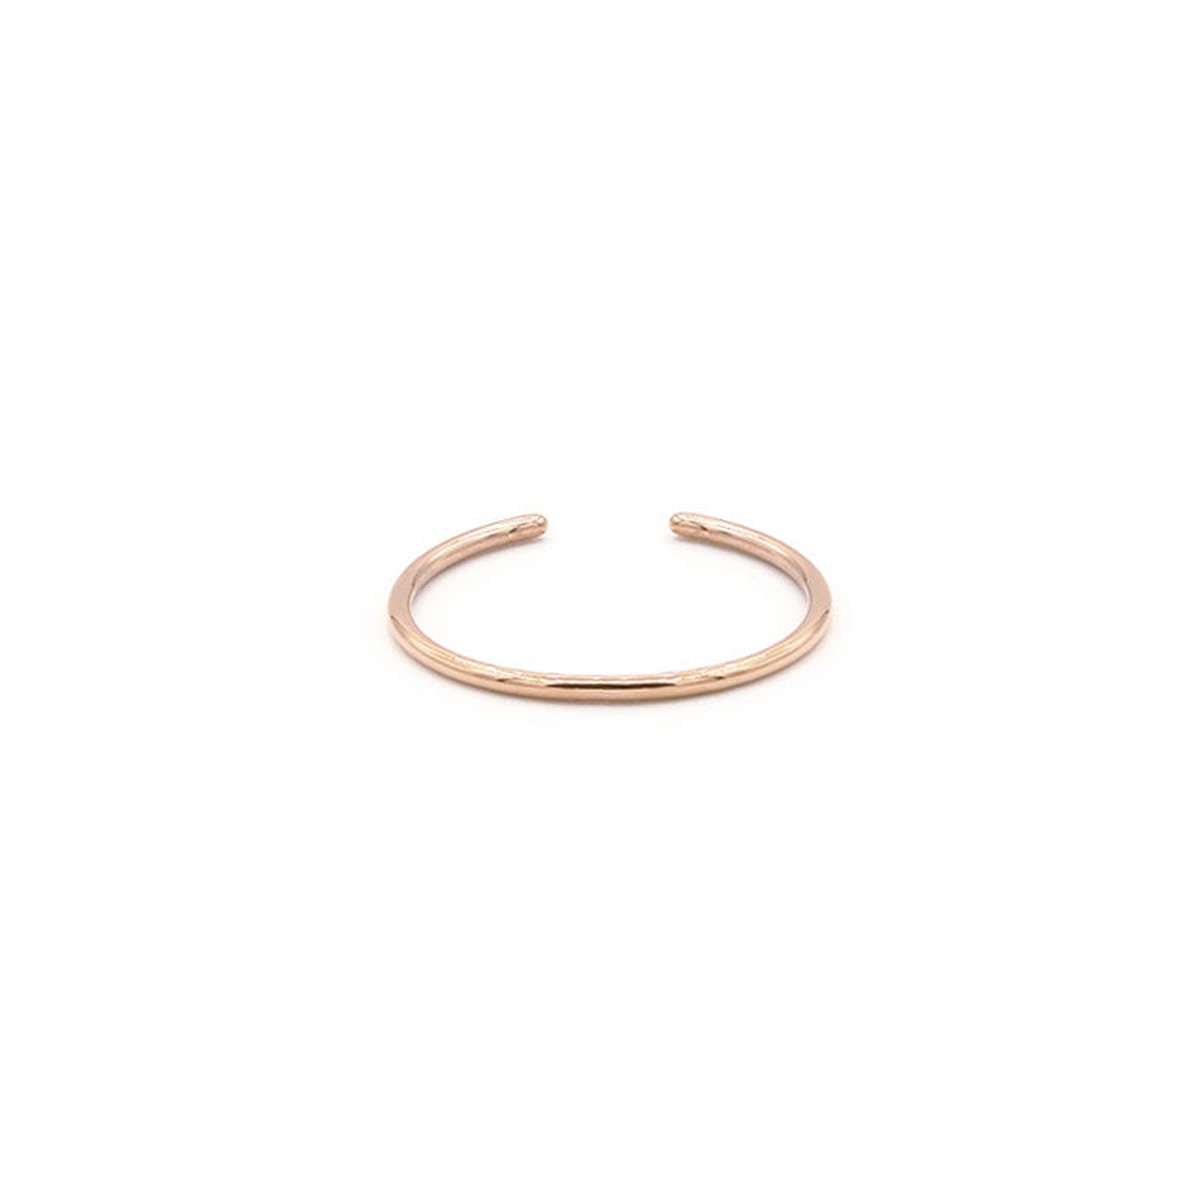 Mint15 Verstelbare ring 'Tiny stacking ring' - Roségoud RVS/Stainless Steel